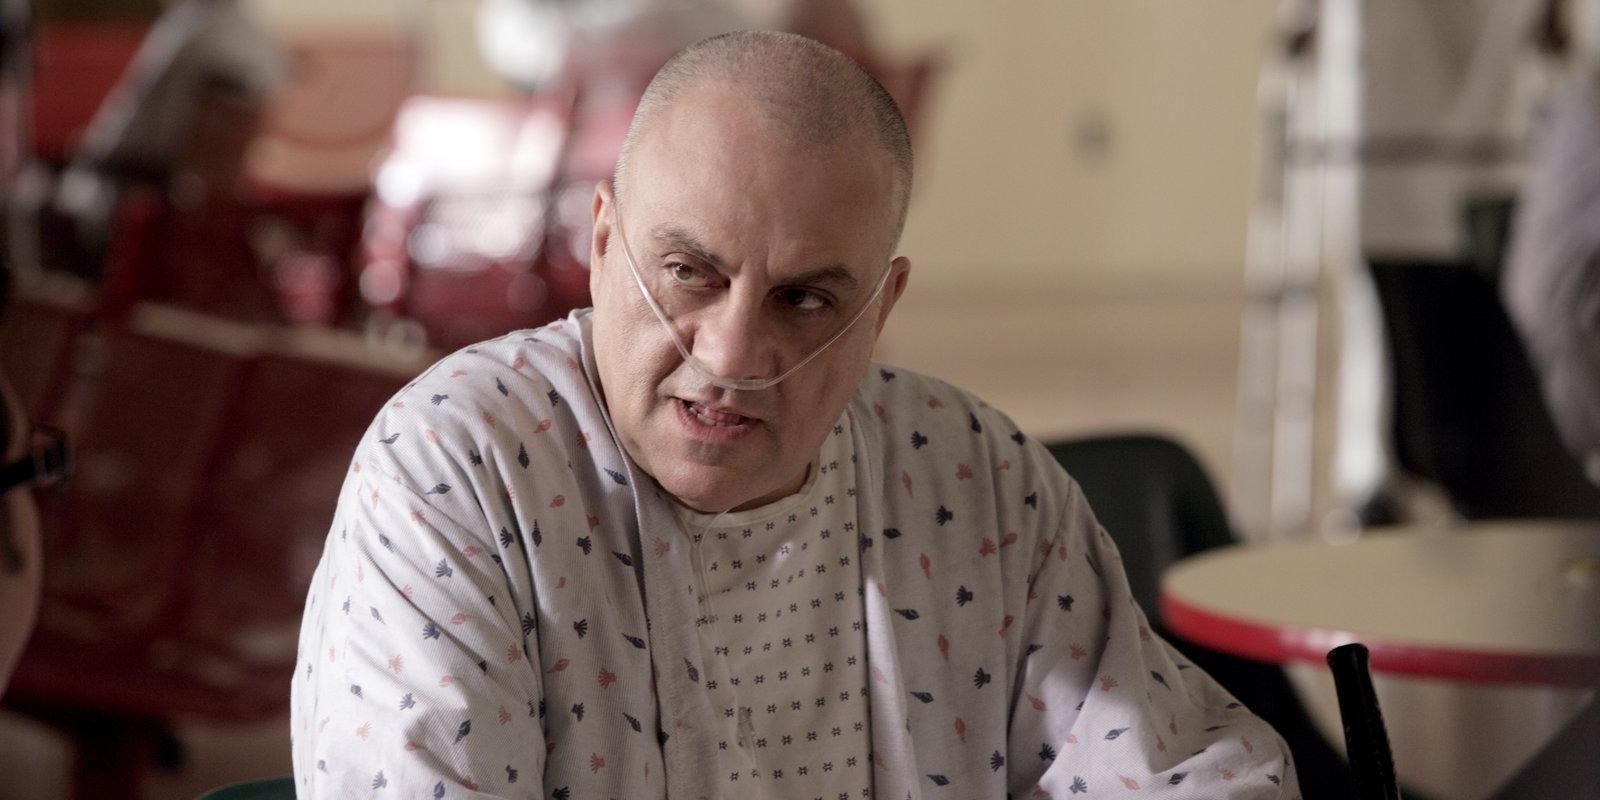 Johnny Sack speaks to a fellow inmate at the prison clinic in The Sopranos